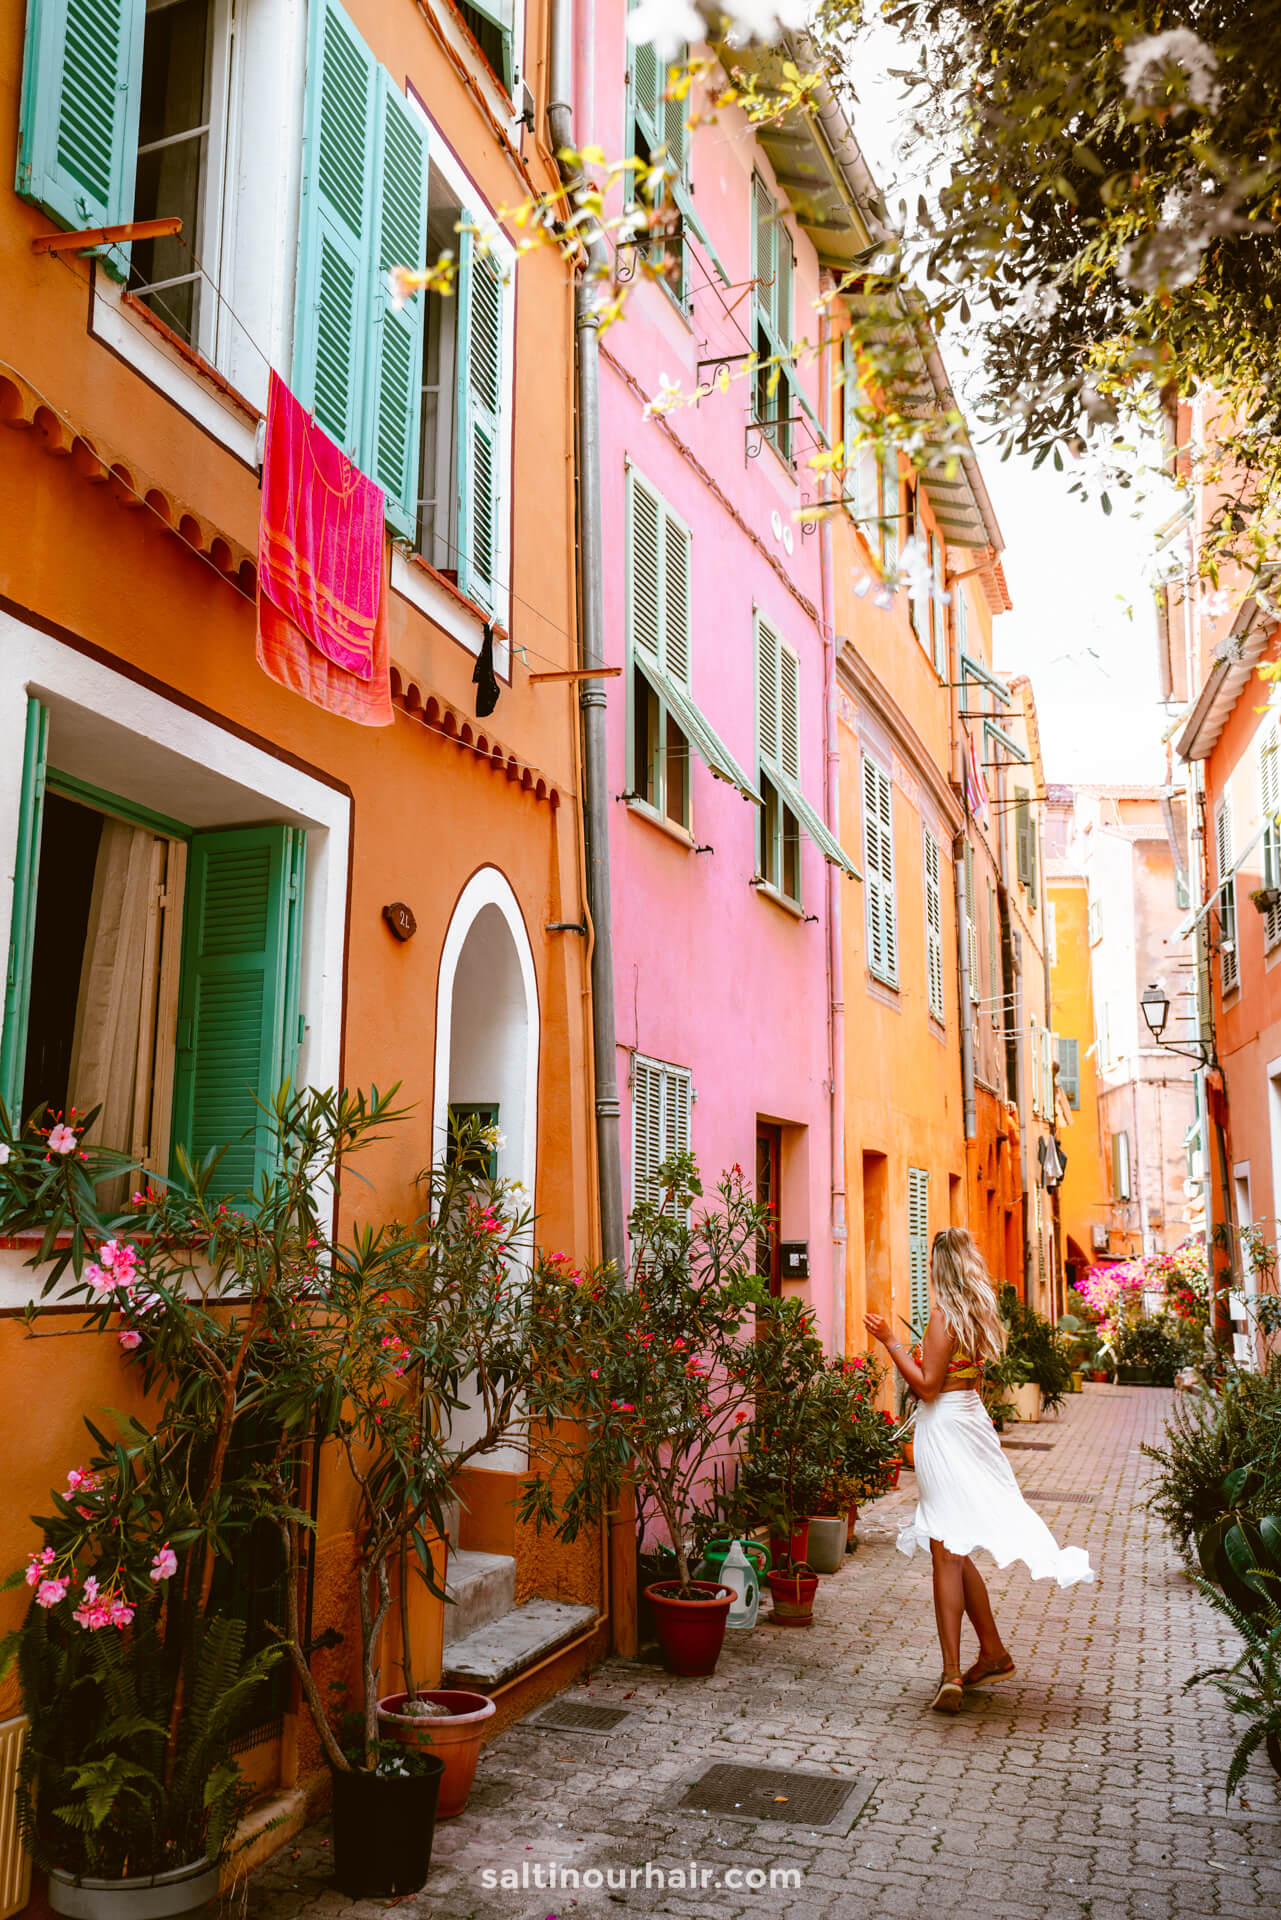 villefranche-sur-mer pastel houses french riviera